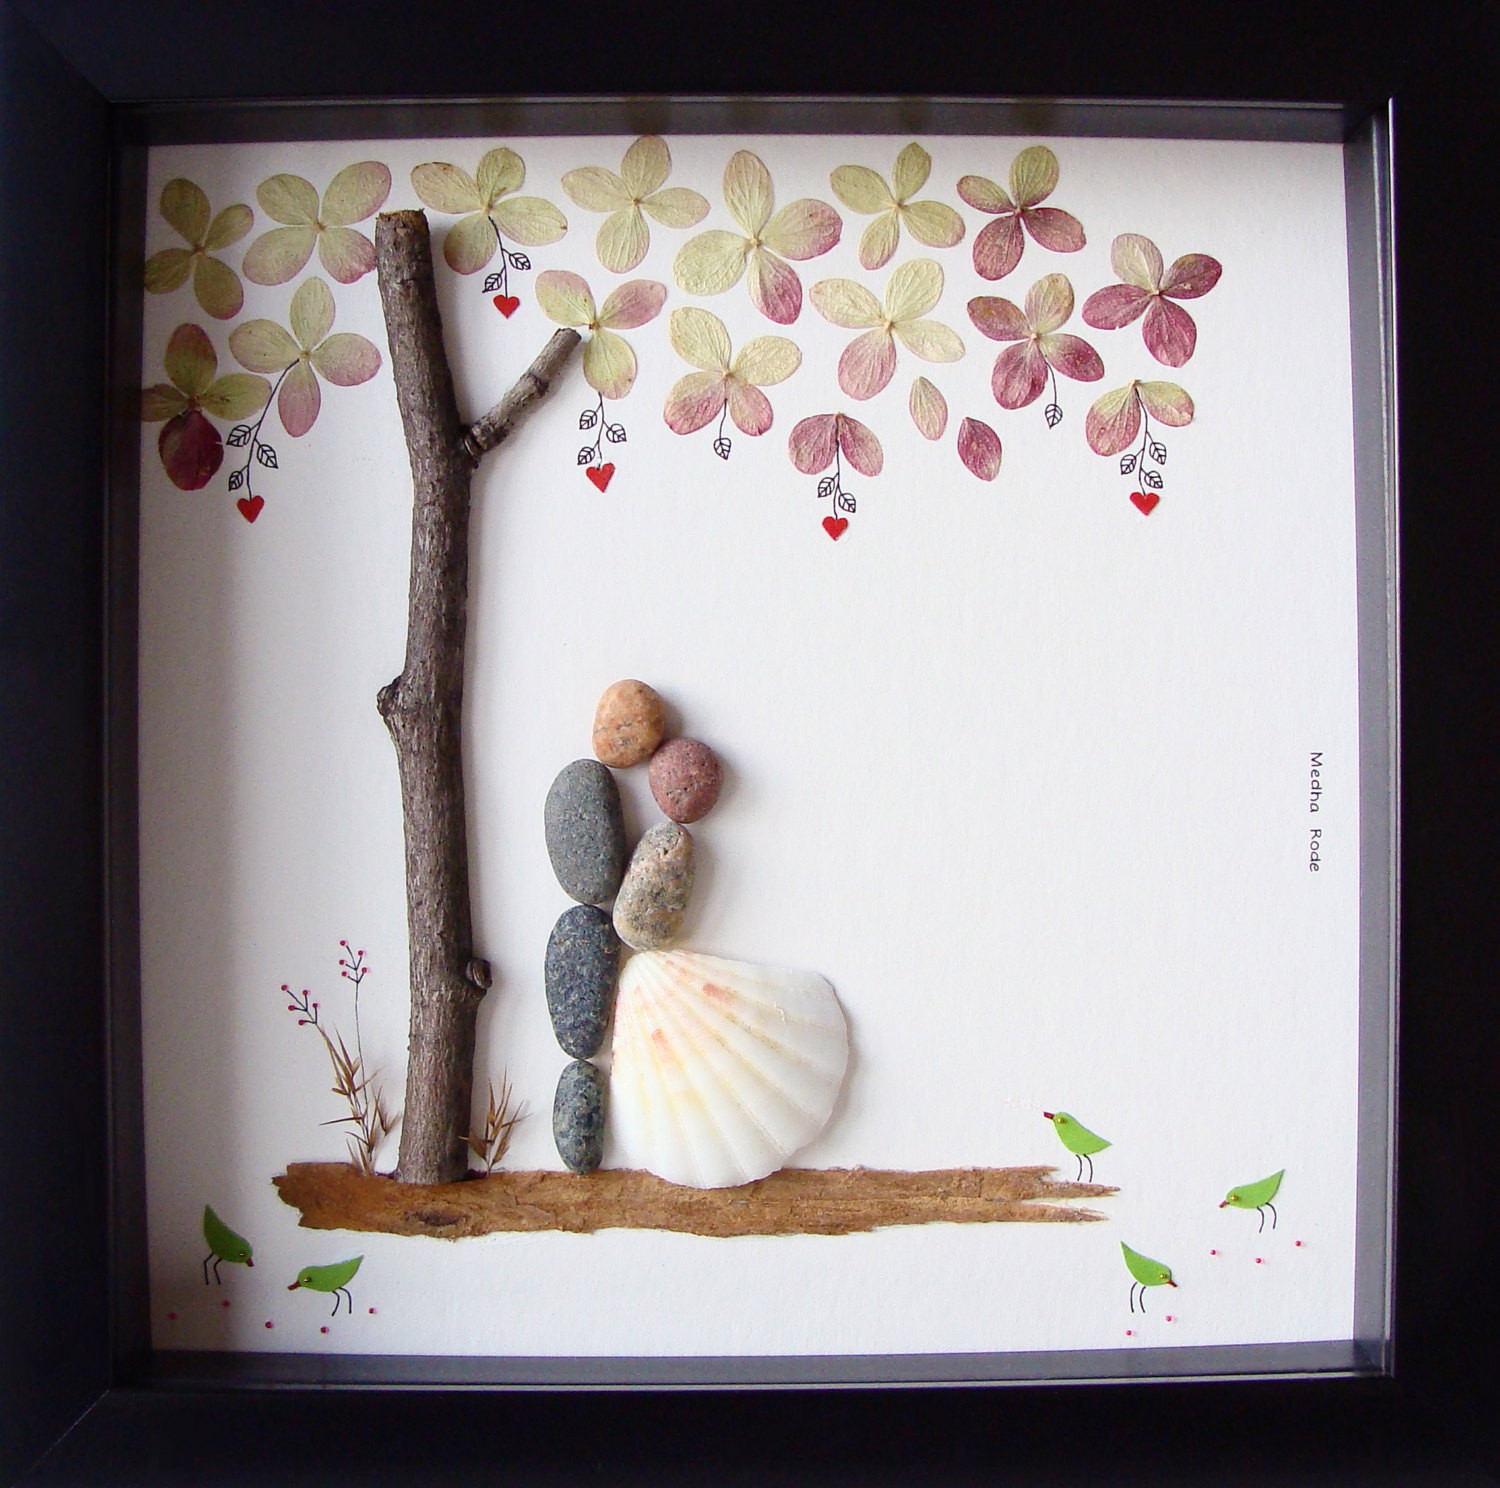 Engagement Gift Ideas For Couples
 Unique Wedding Gift For Couple Wedding Pebble Art by MedhaRode